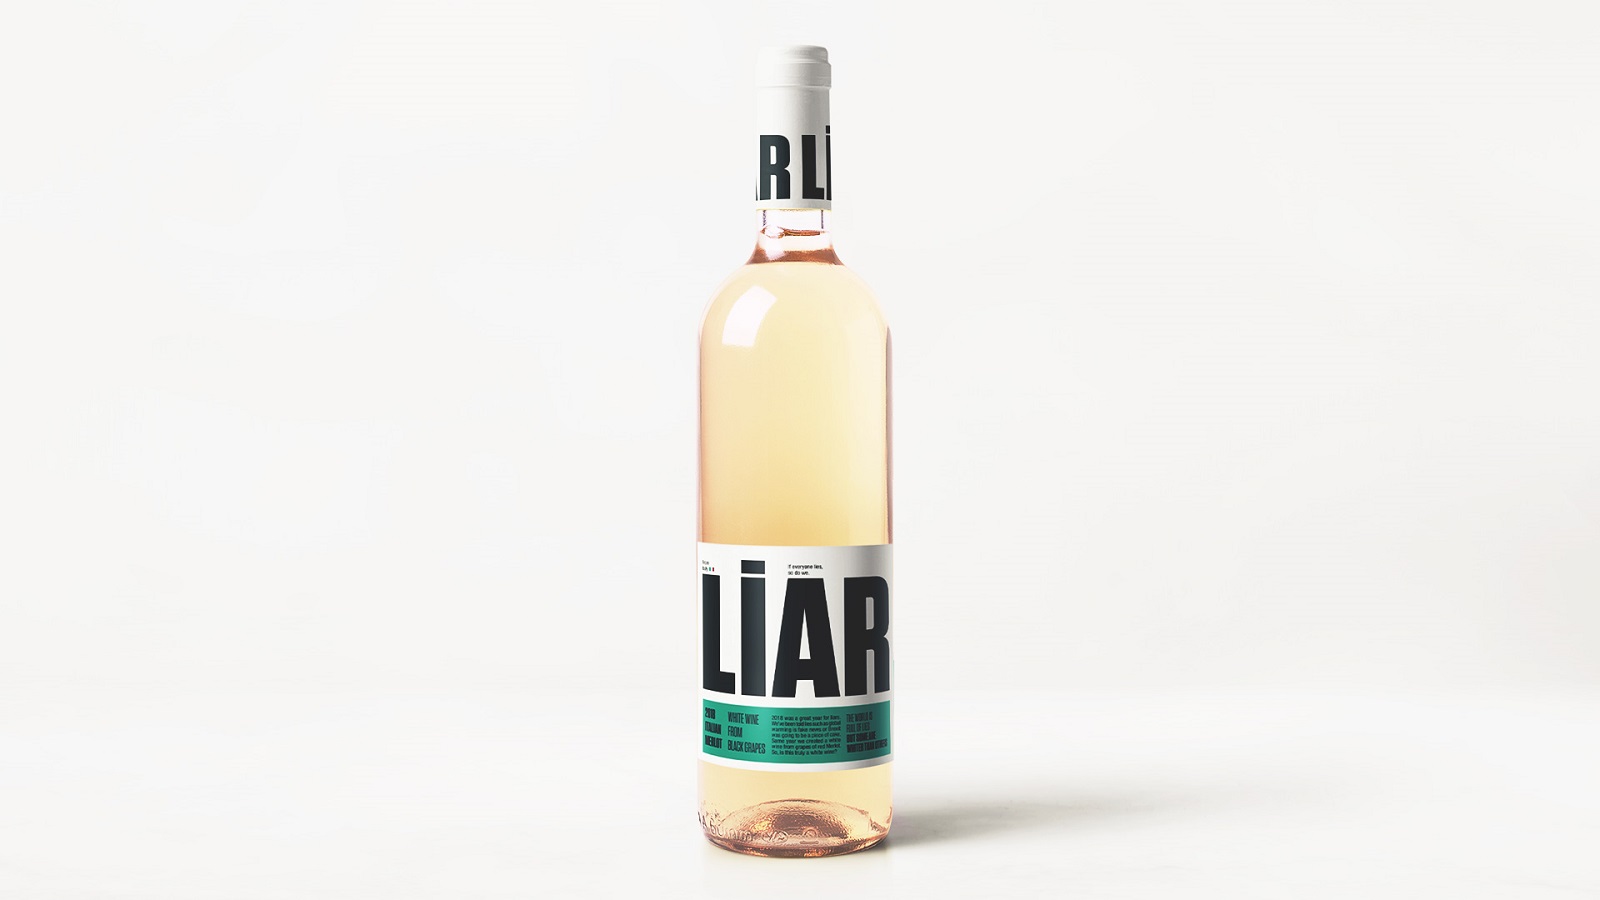 LIAR Wine Makes You Choose the Lesser of the Two Evils